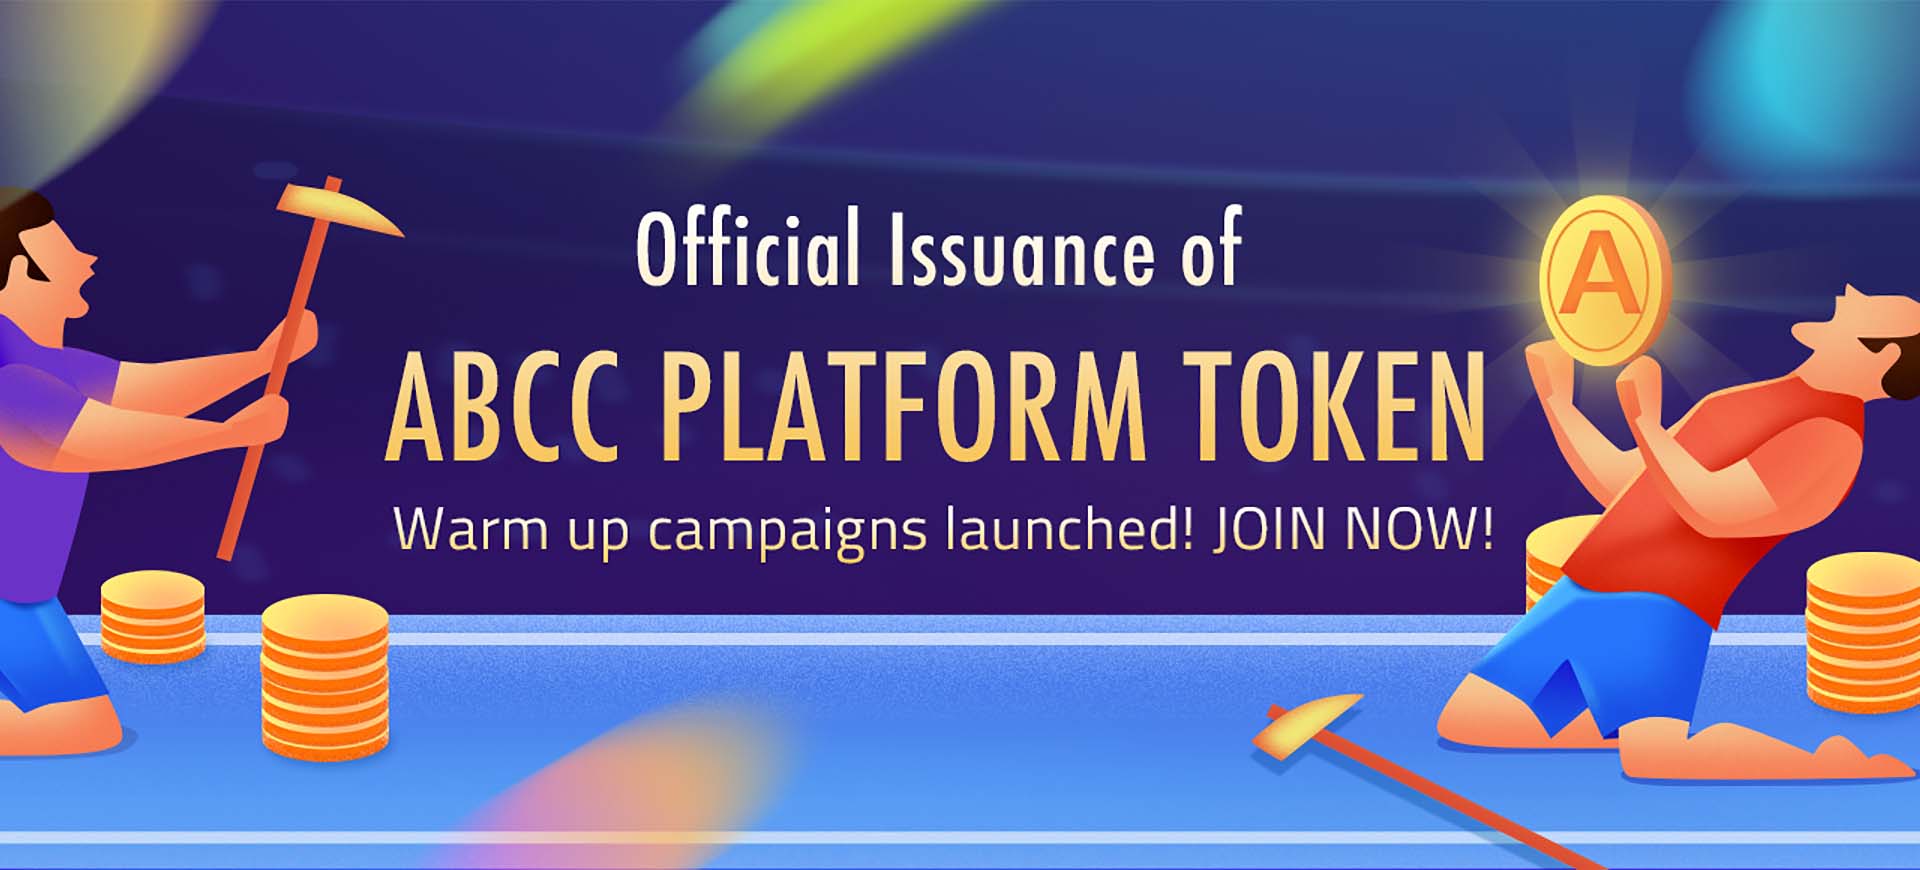 Leading Crypto Exchange Platform ABCC to Launch Own Cryptocurrency Token and Referral Program